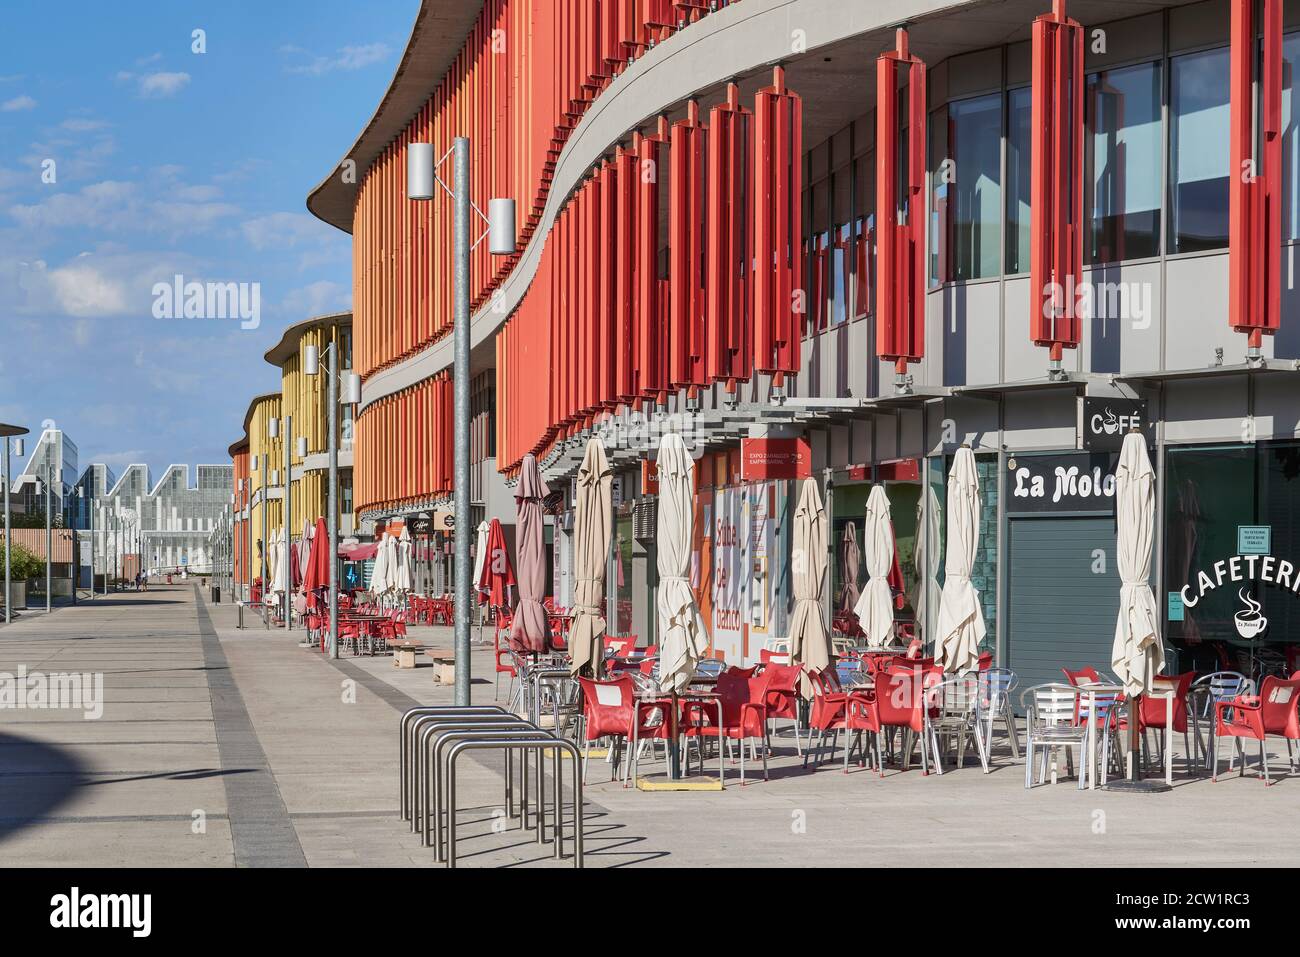 Buildings and terraces of bars, cafes and restaurants in the Specialized Exhibition of Zaragoza (Expo 2008), Aragon, Spain, Europe Stock Photo